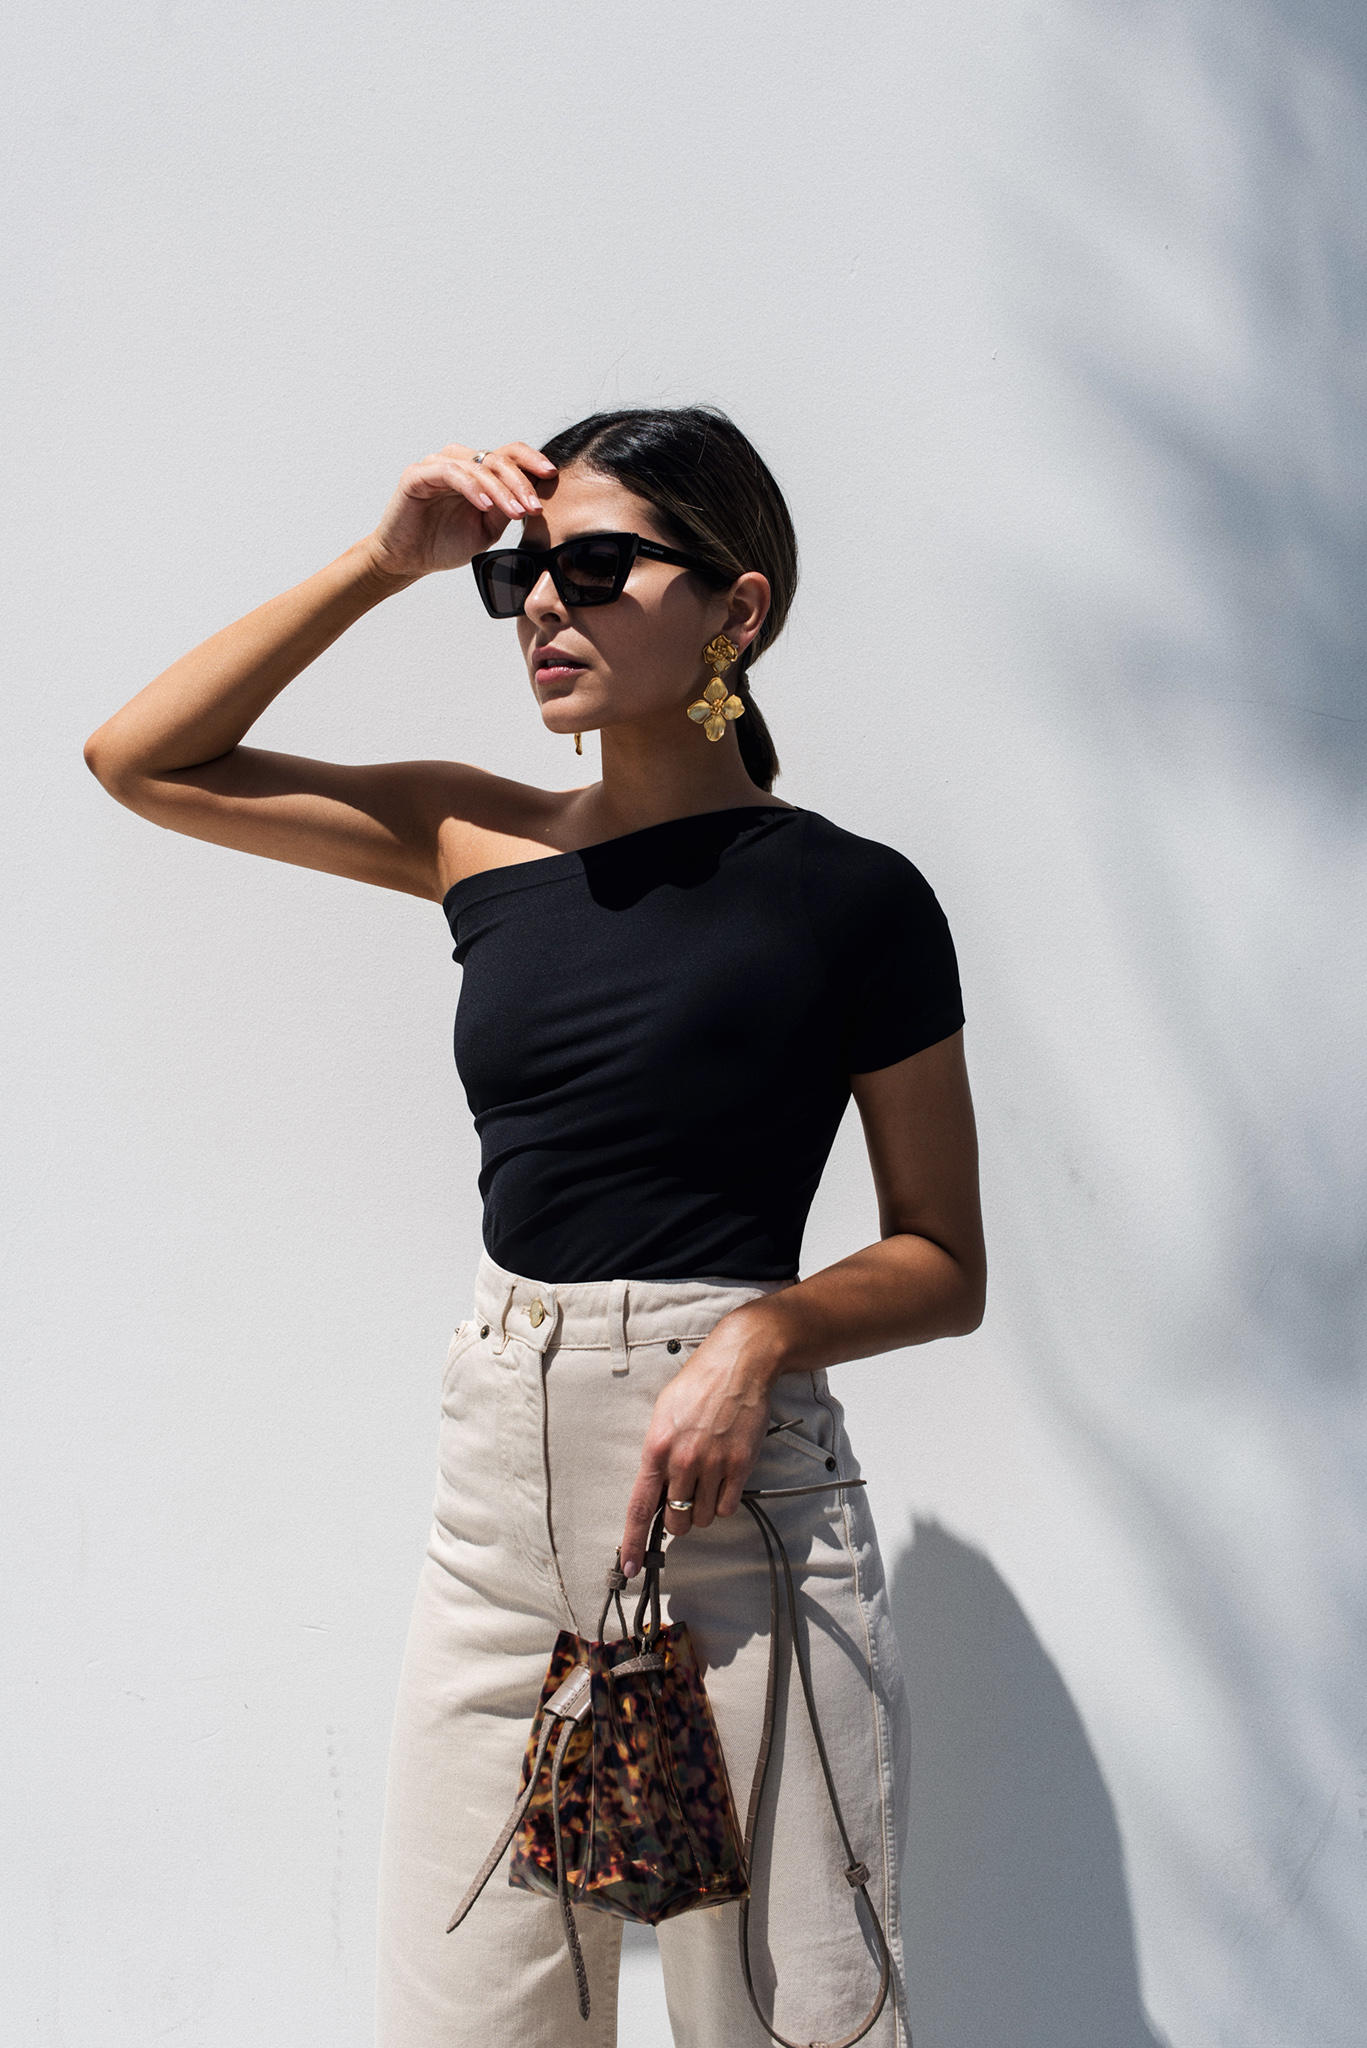 Pieces to bring on your next vacation, trendy vacation outfits, cropped pants trend, saint laurent sunglasses, nanushka bag | TheGirlFromPanama.com